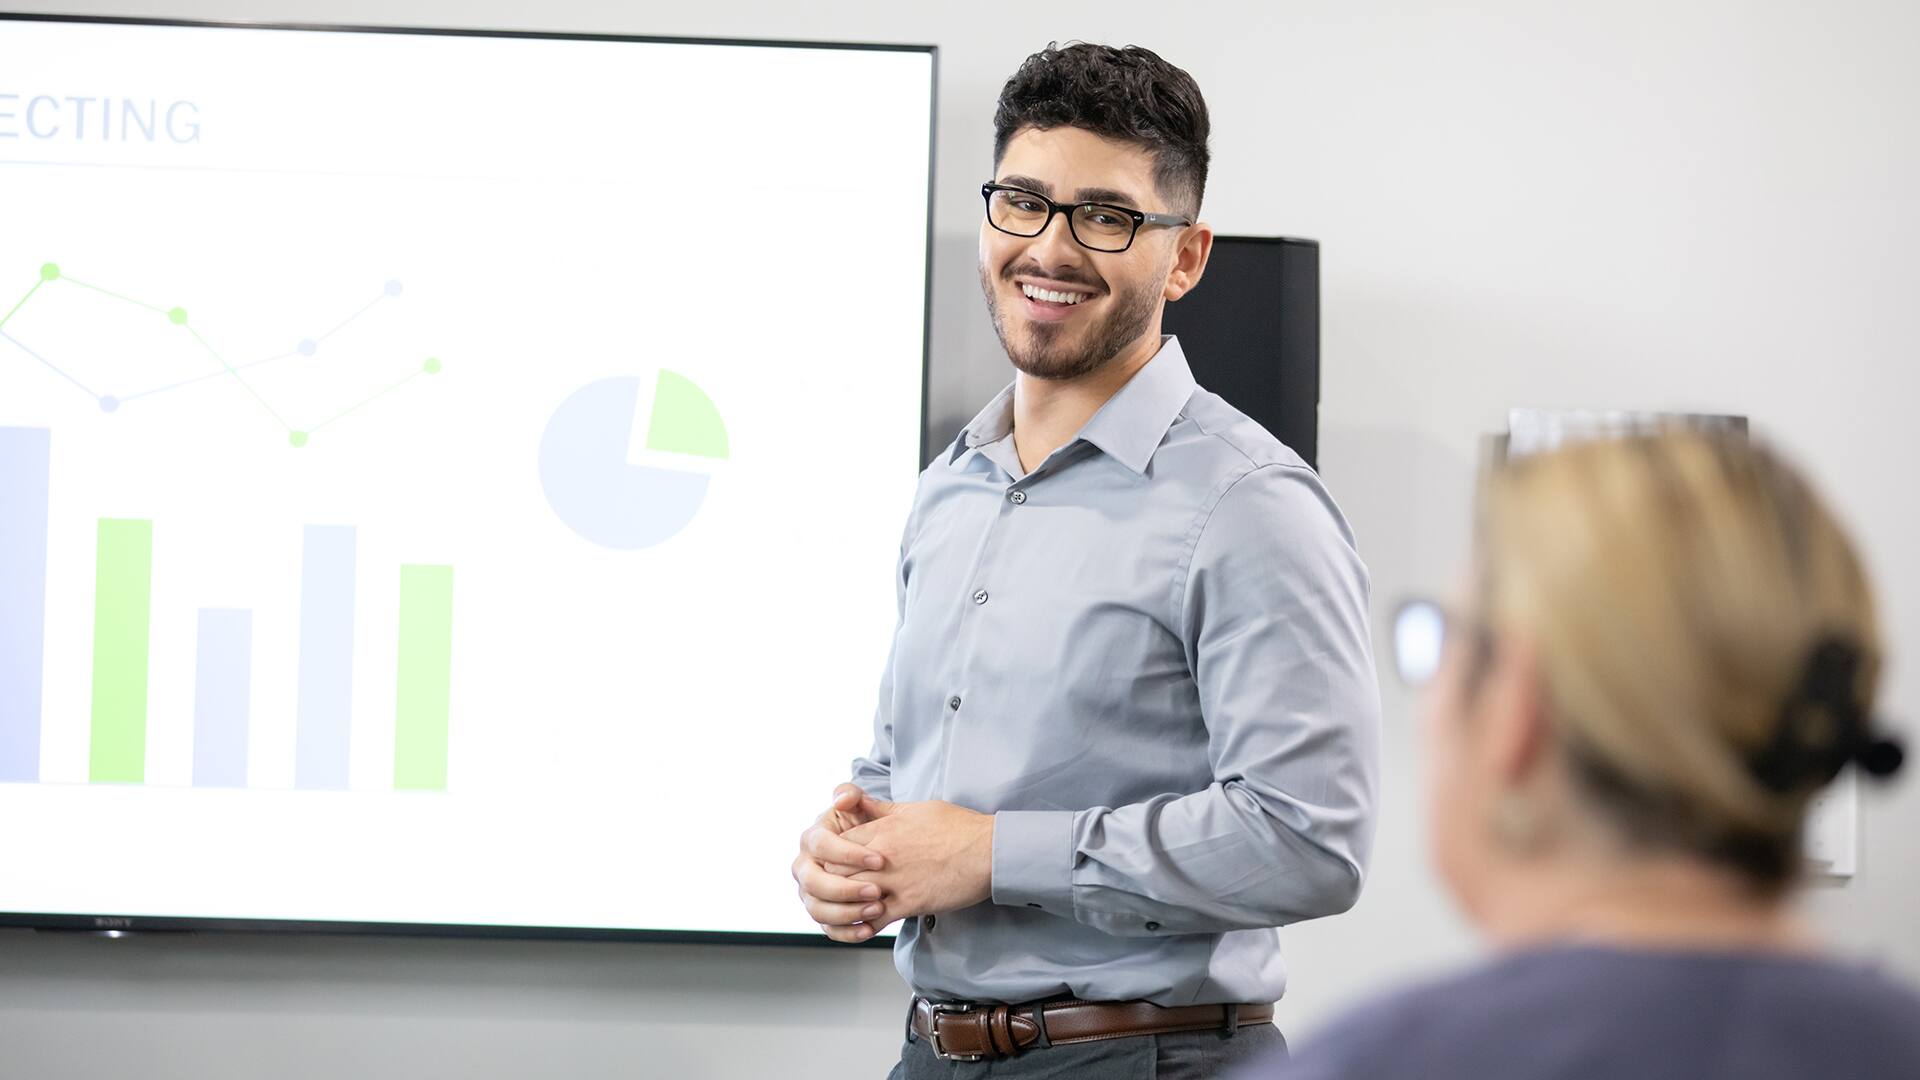 Naeem Jaraysi, who earned his degree from SNHU in 2020, speaking to a woman while standing in front of a projection screen displaying green and blue line, bar and pie charts.